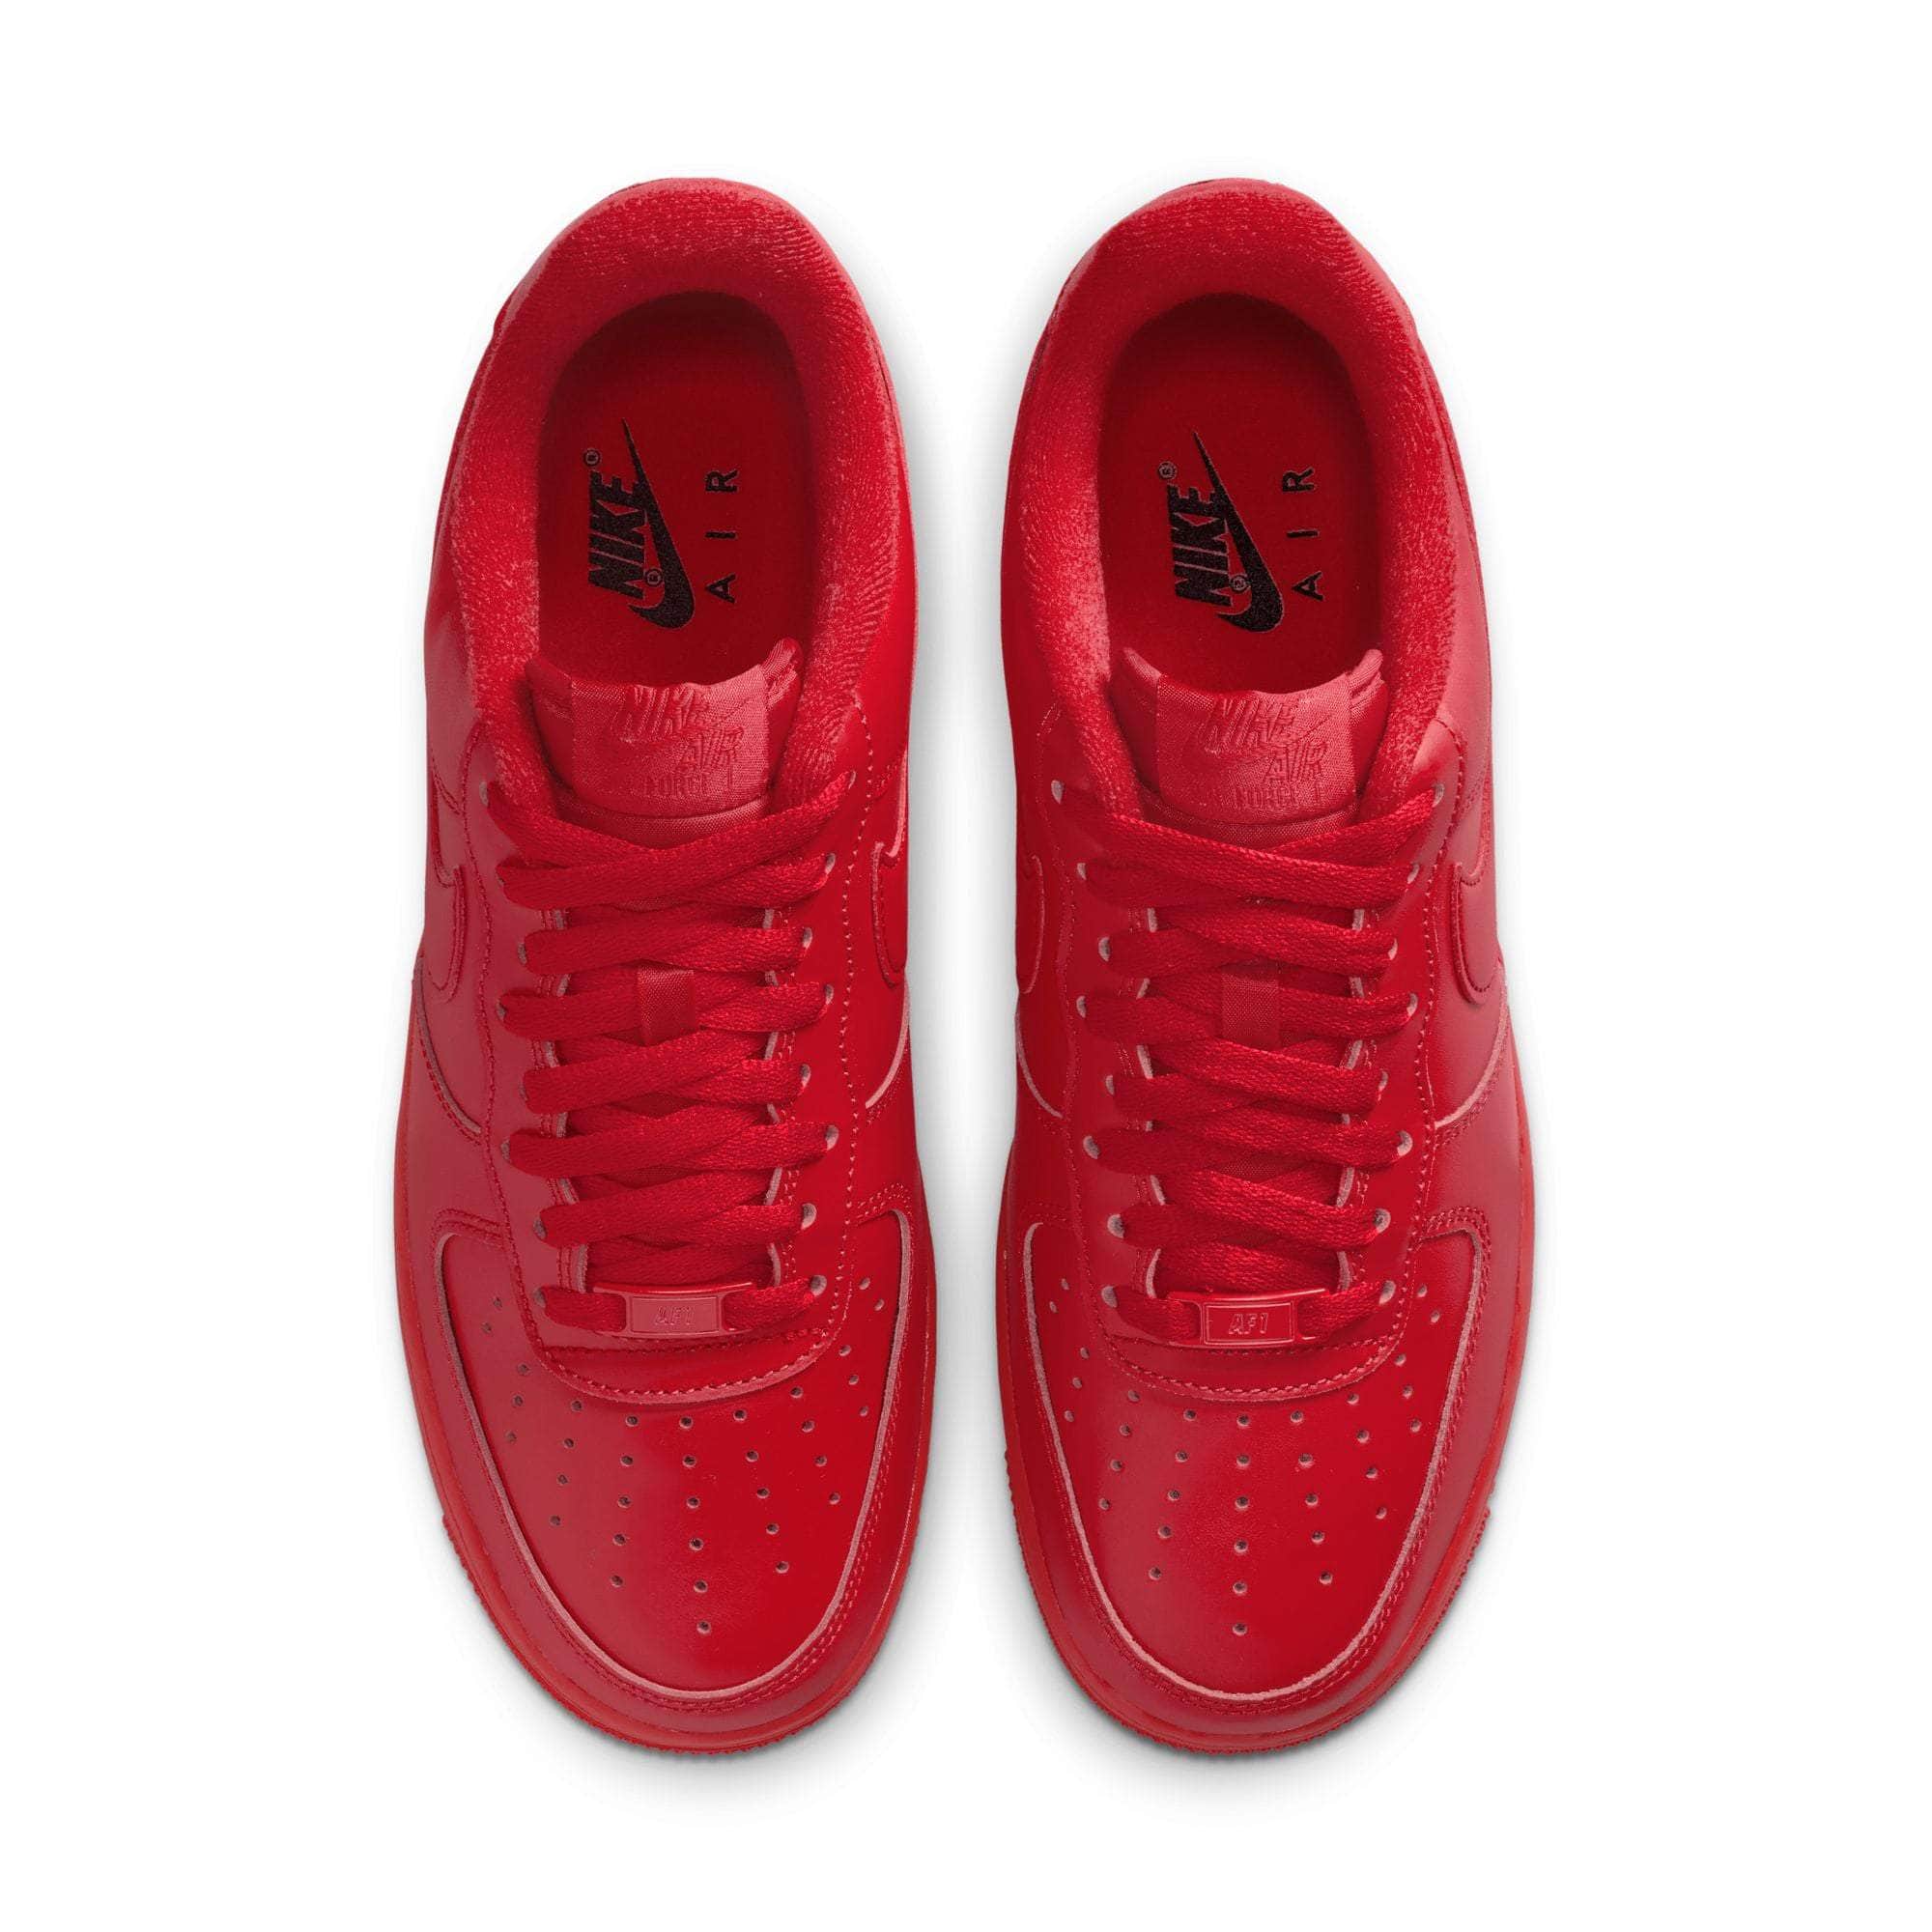 Men's Nike Air Force 1 '07 LV8 1 Triple Red University Red (CW6999 600) -  8.5 